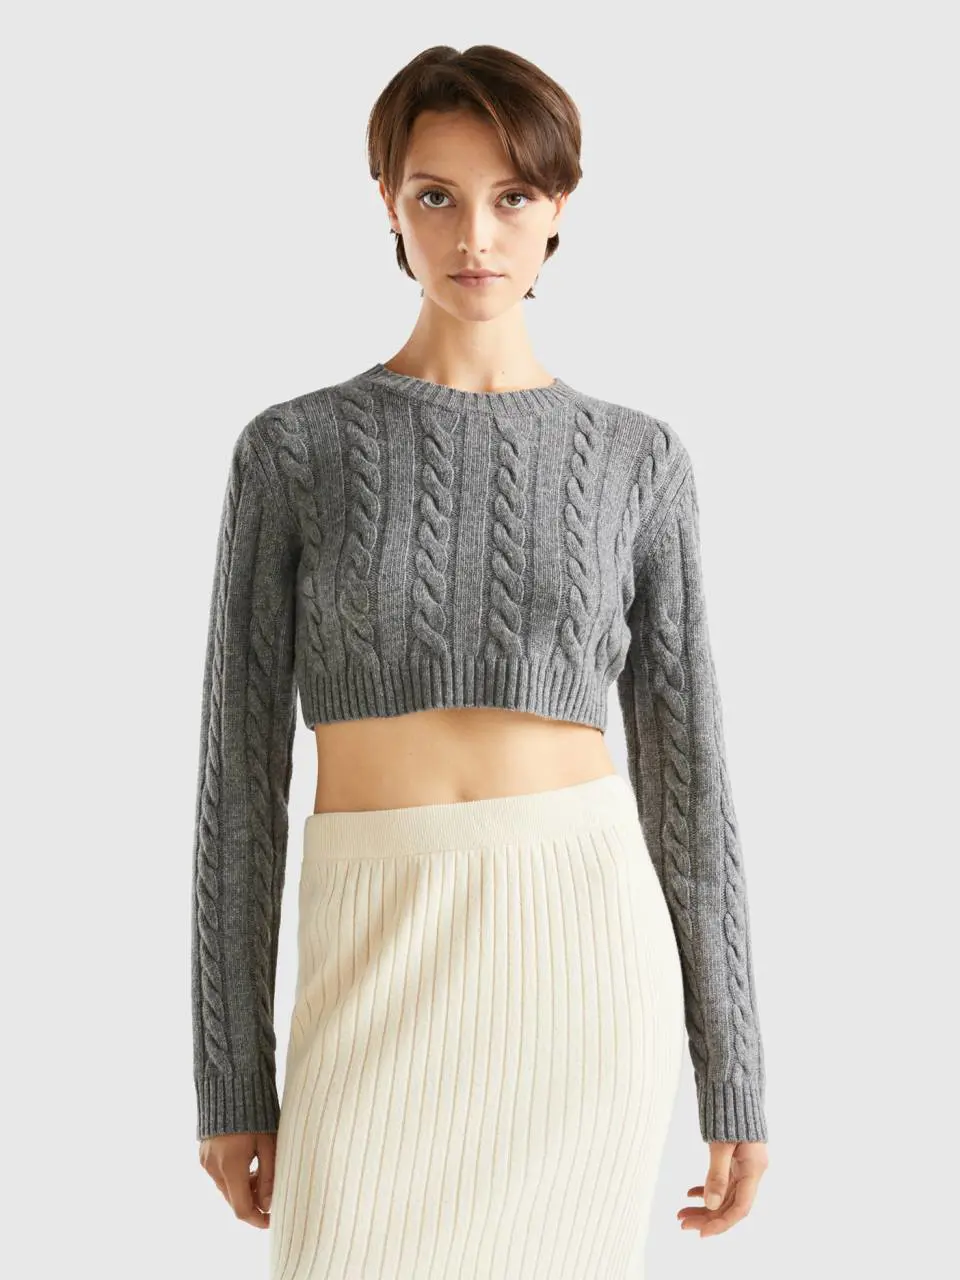 Benetton cropped sweater with cables. 1